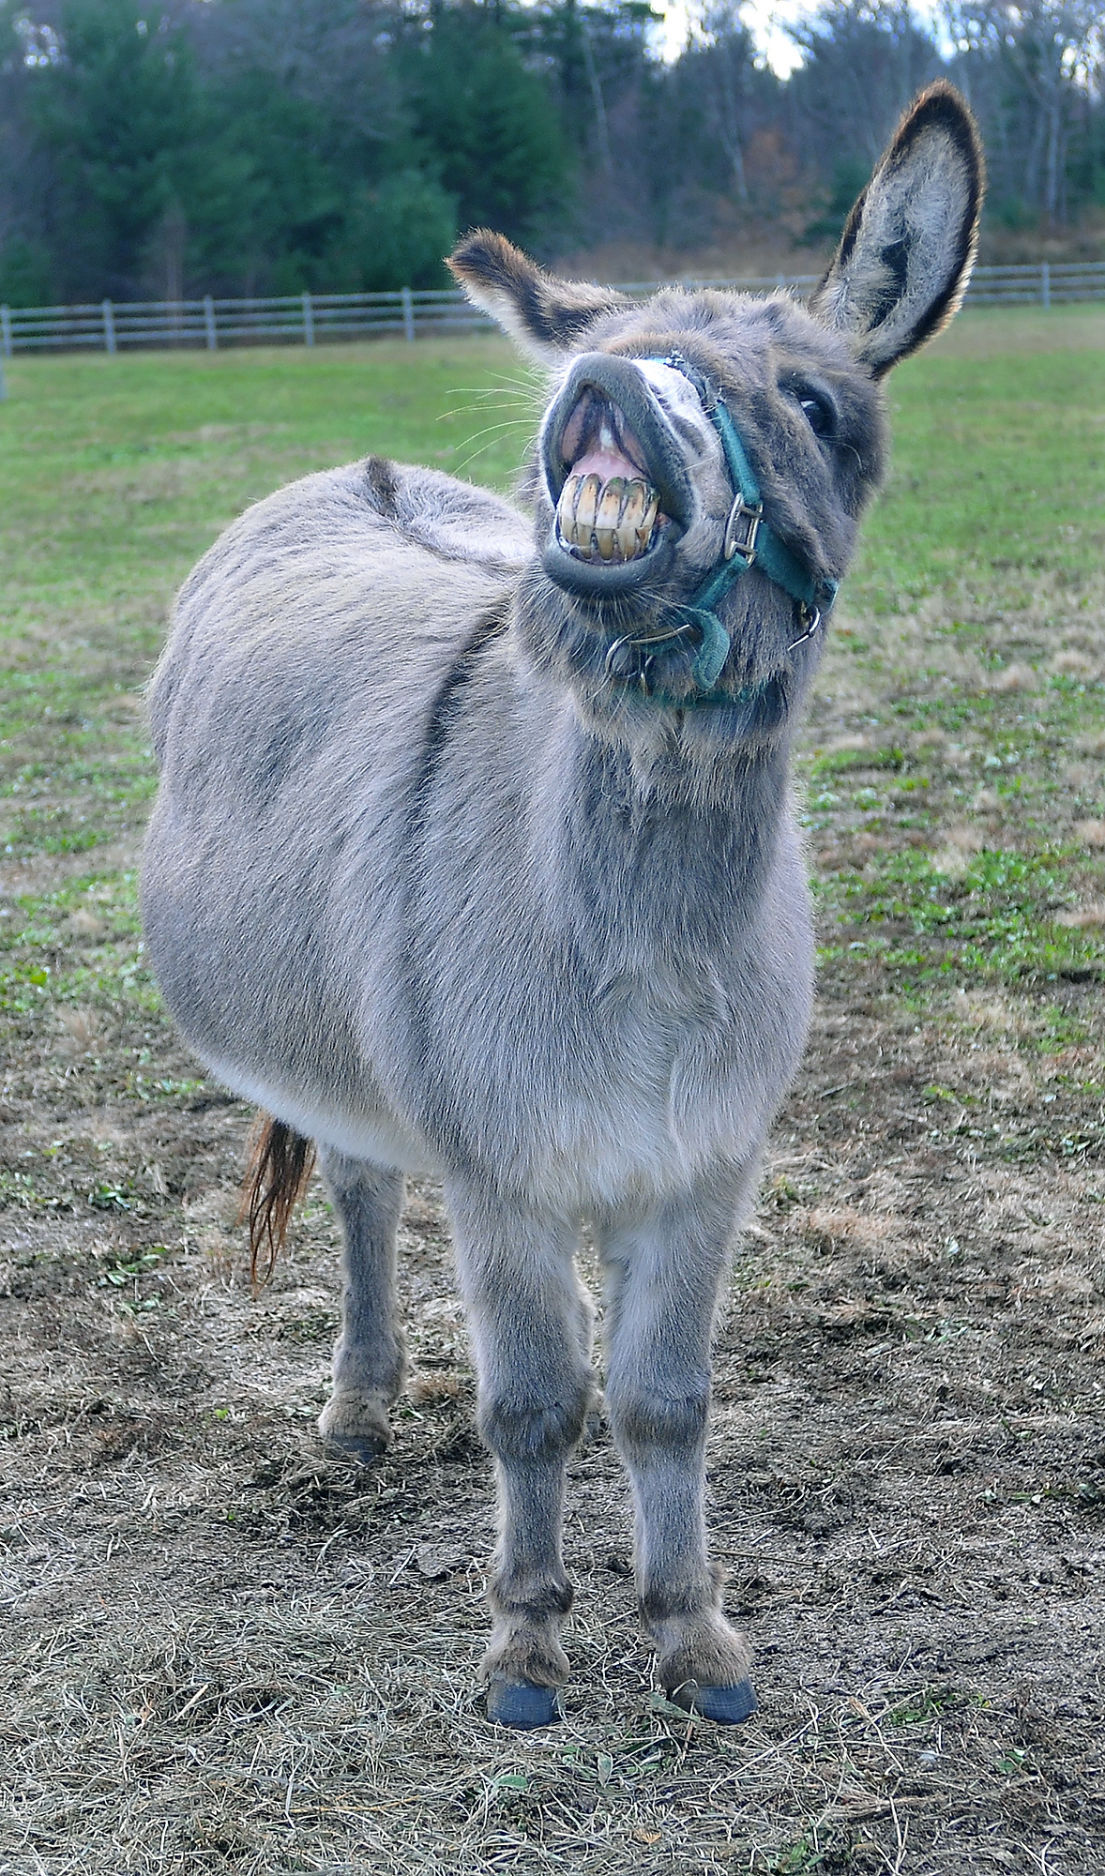 Clopper the Donkey will return to LaSalette | Local News ...